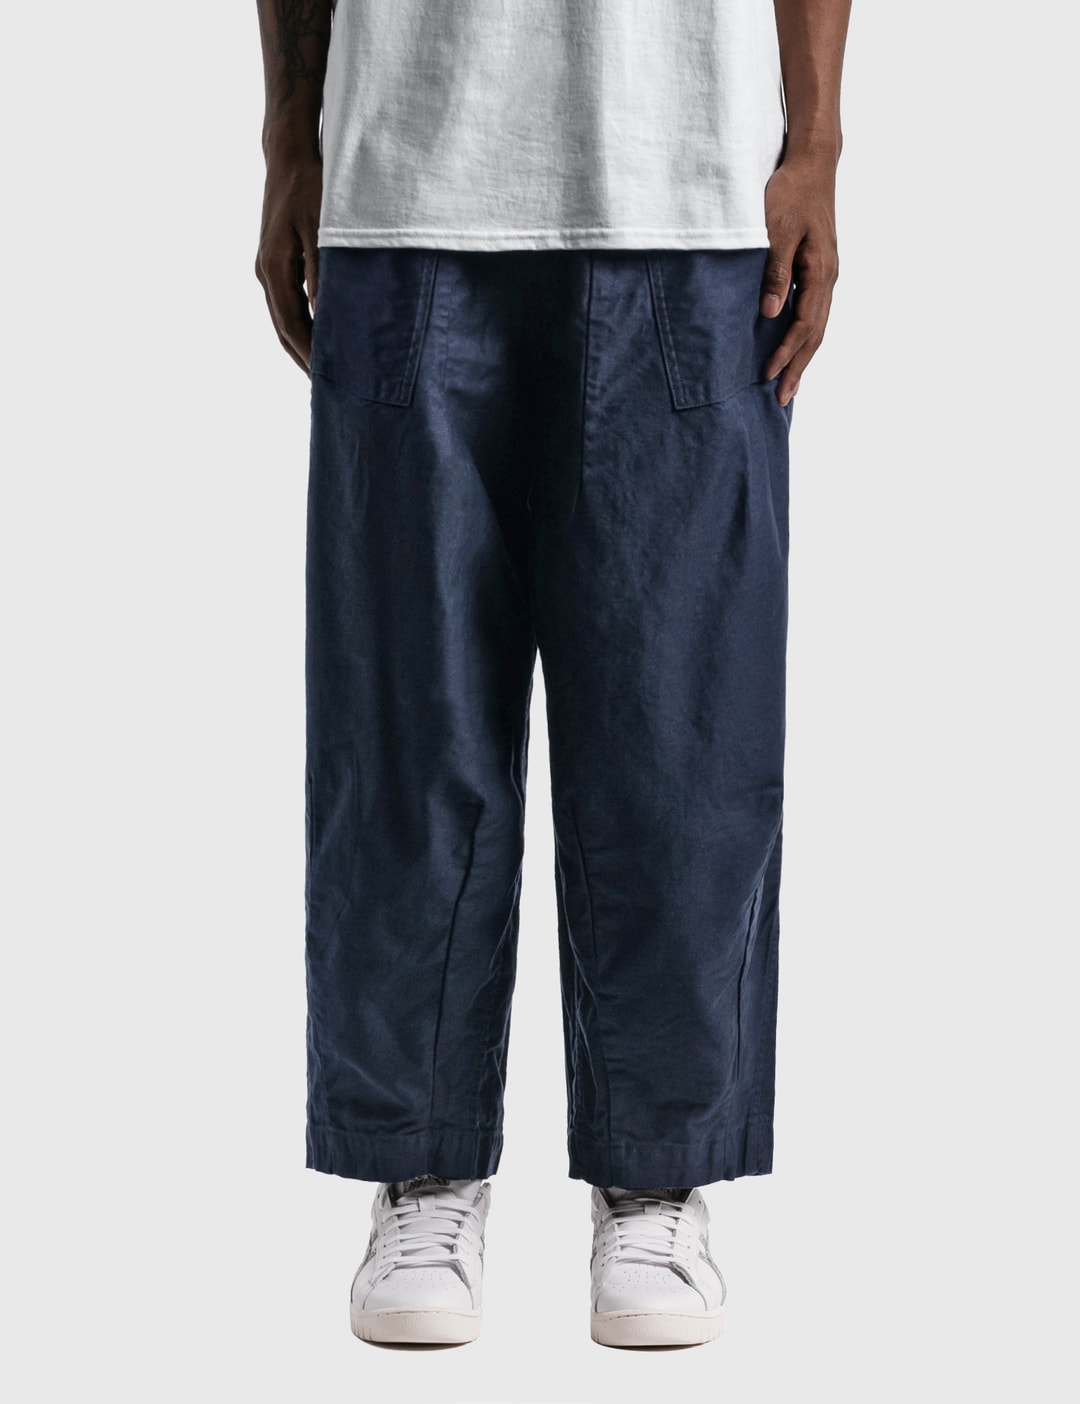 Needles - Fatigue H.D. Pants | HBX - Globally Curated Fashion and ...